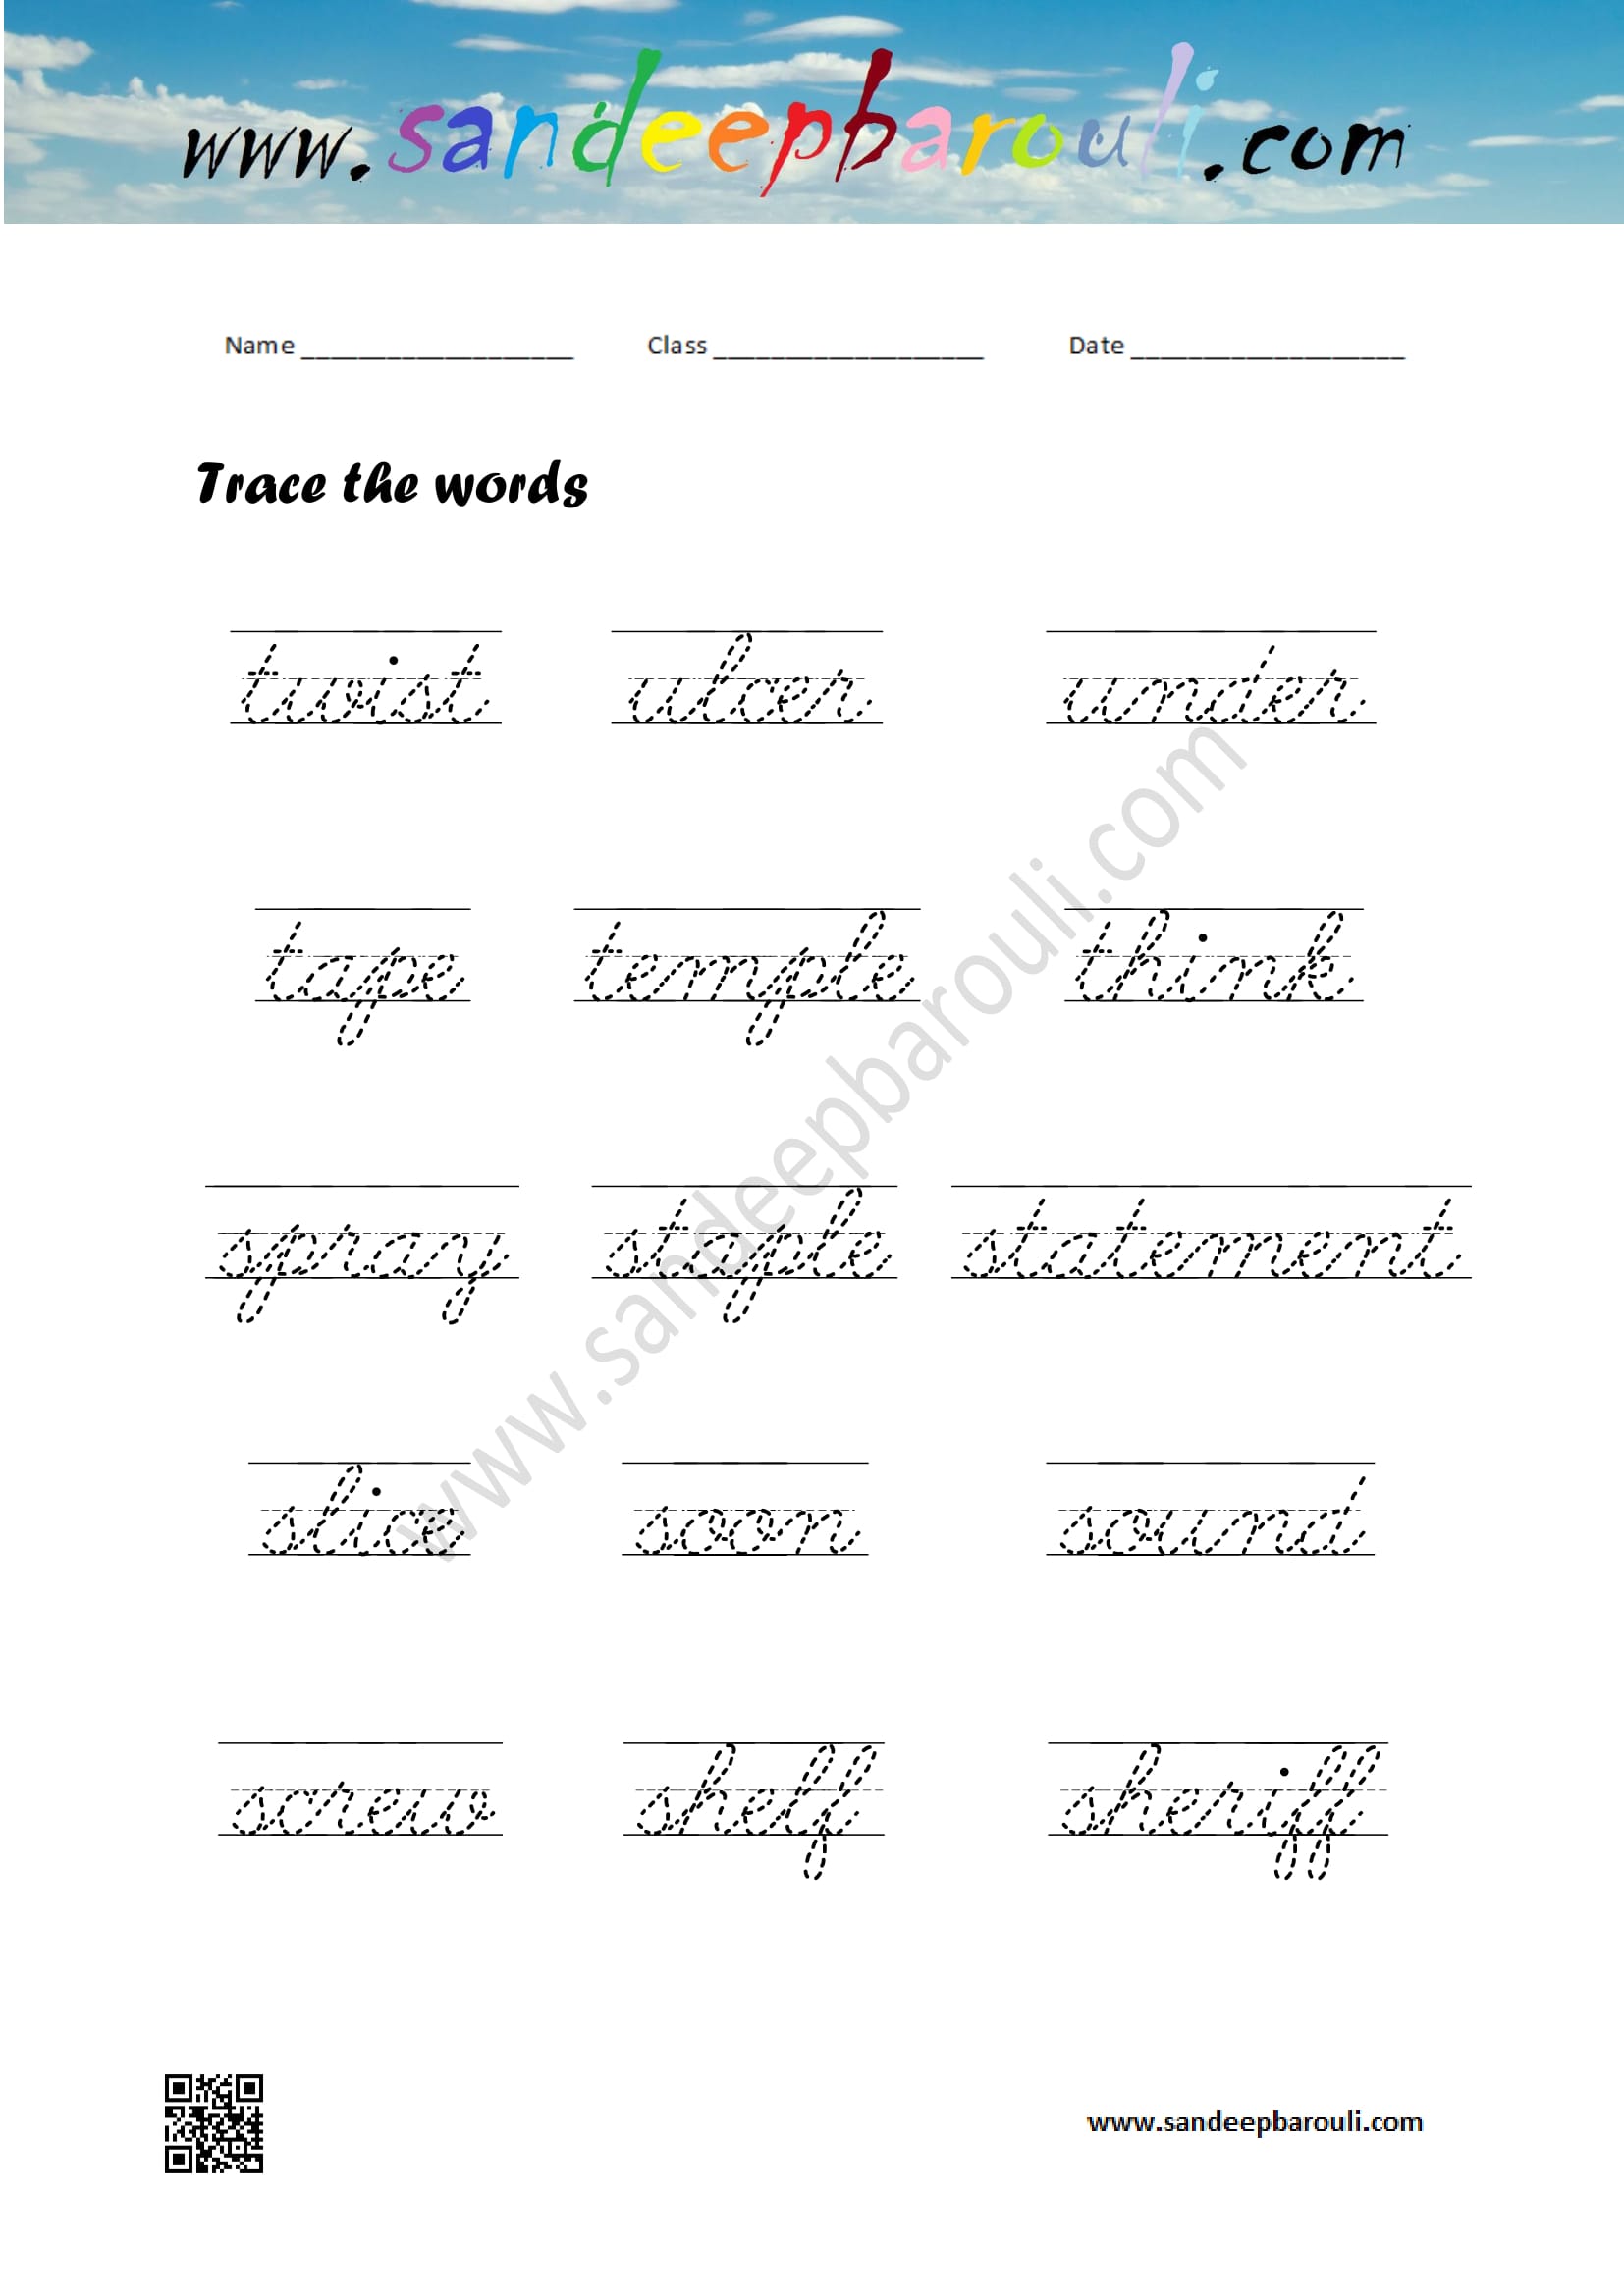 Cursive Writing Worksheet – Trace the words (70)